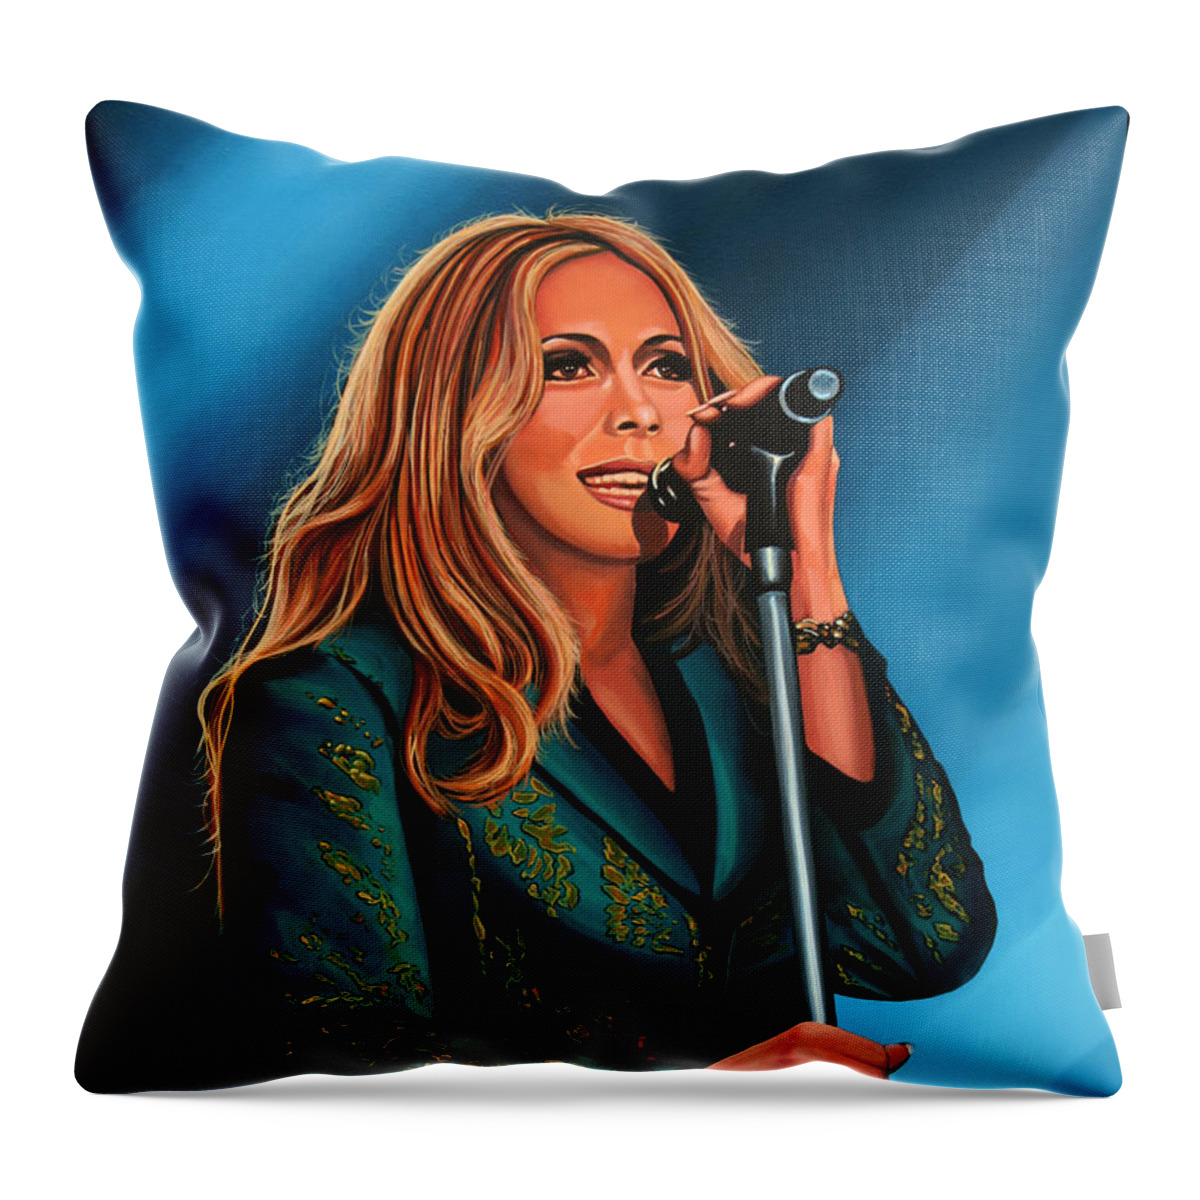 Anouk Throw Pillow featuring the painting Anouk Painting by Paul Meijering